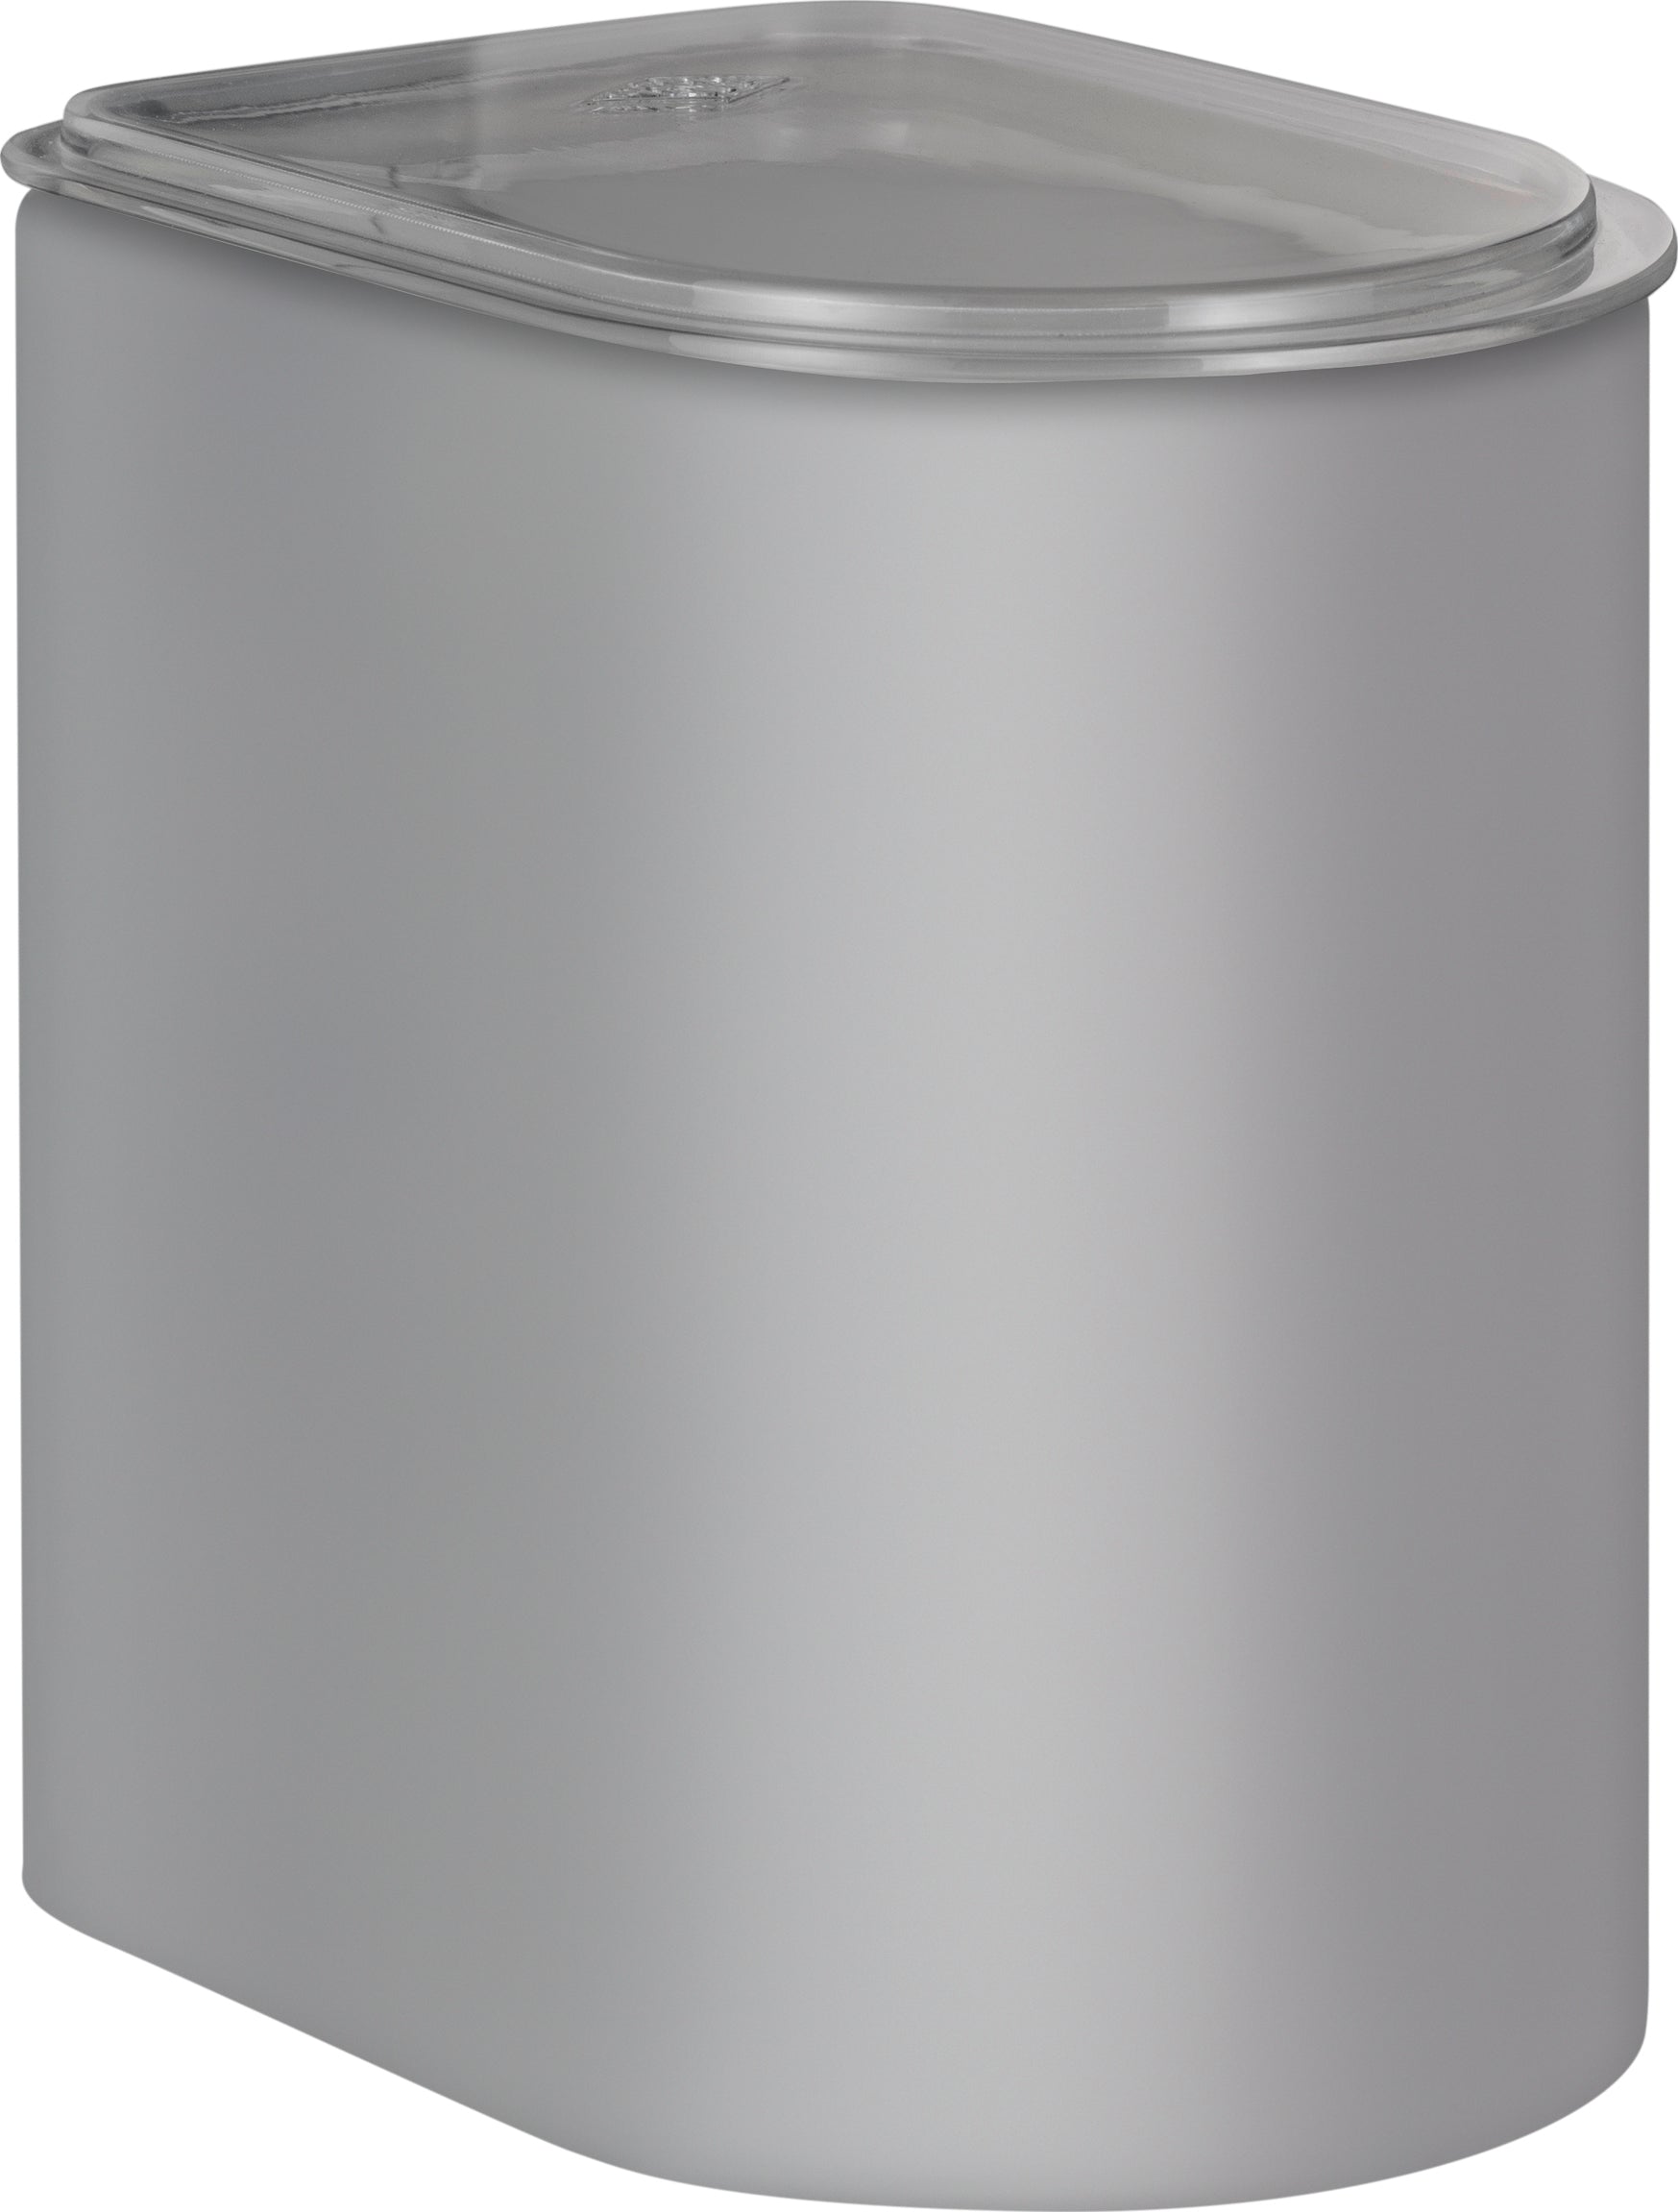 Wesco Canister 2,2 Litre With Acrylic Lid, Cool Grey Matt